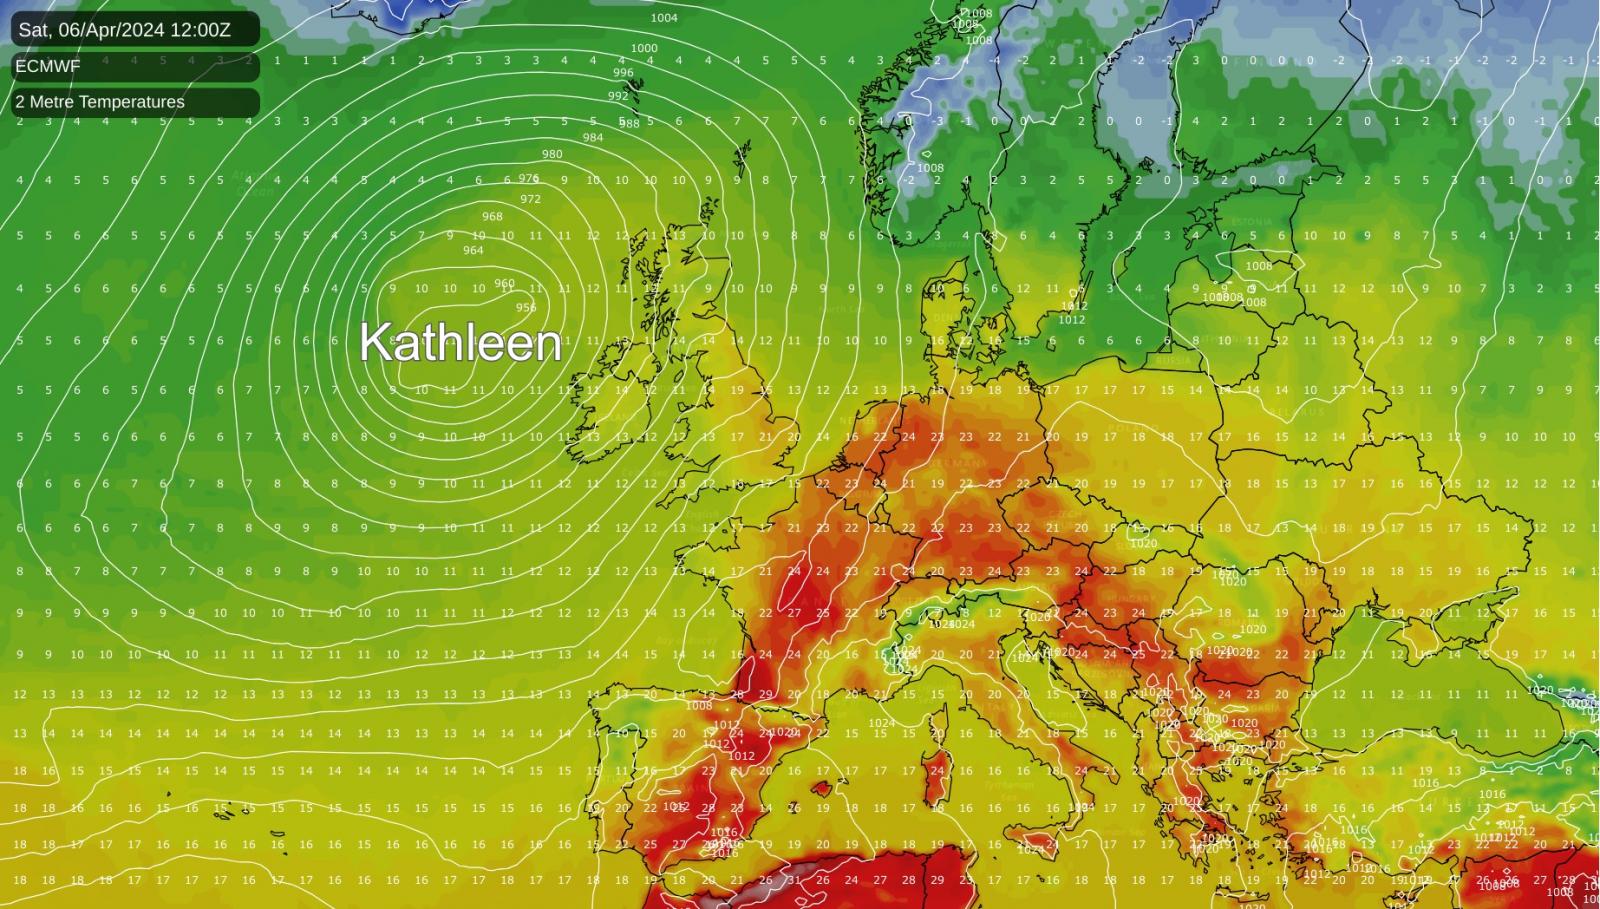 Storm Kathleen bringing very warm temperatures into Europe